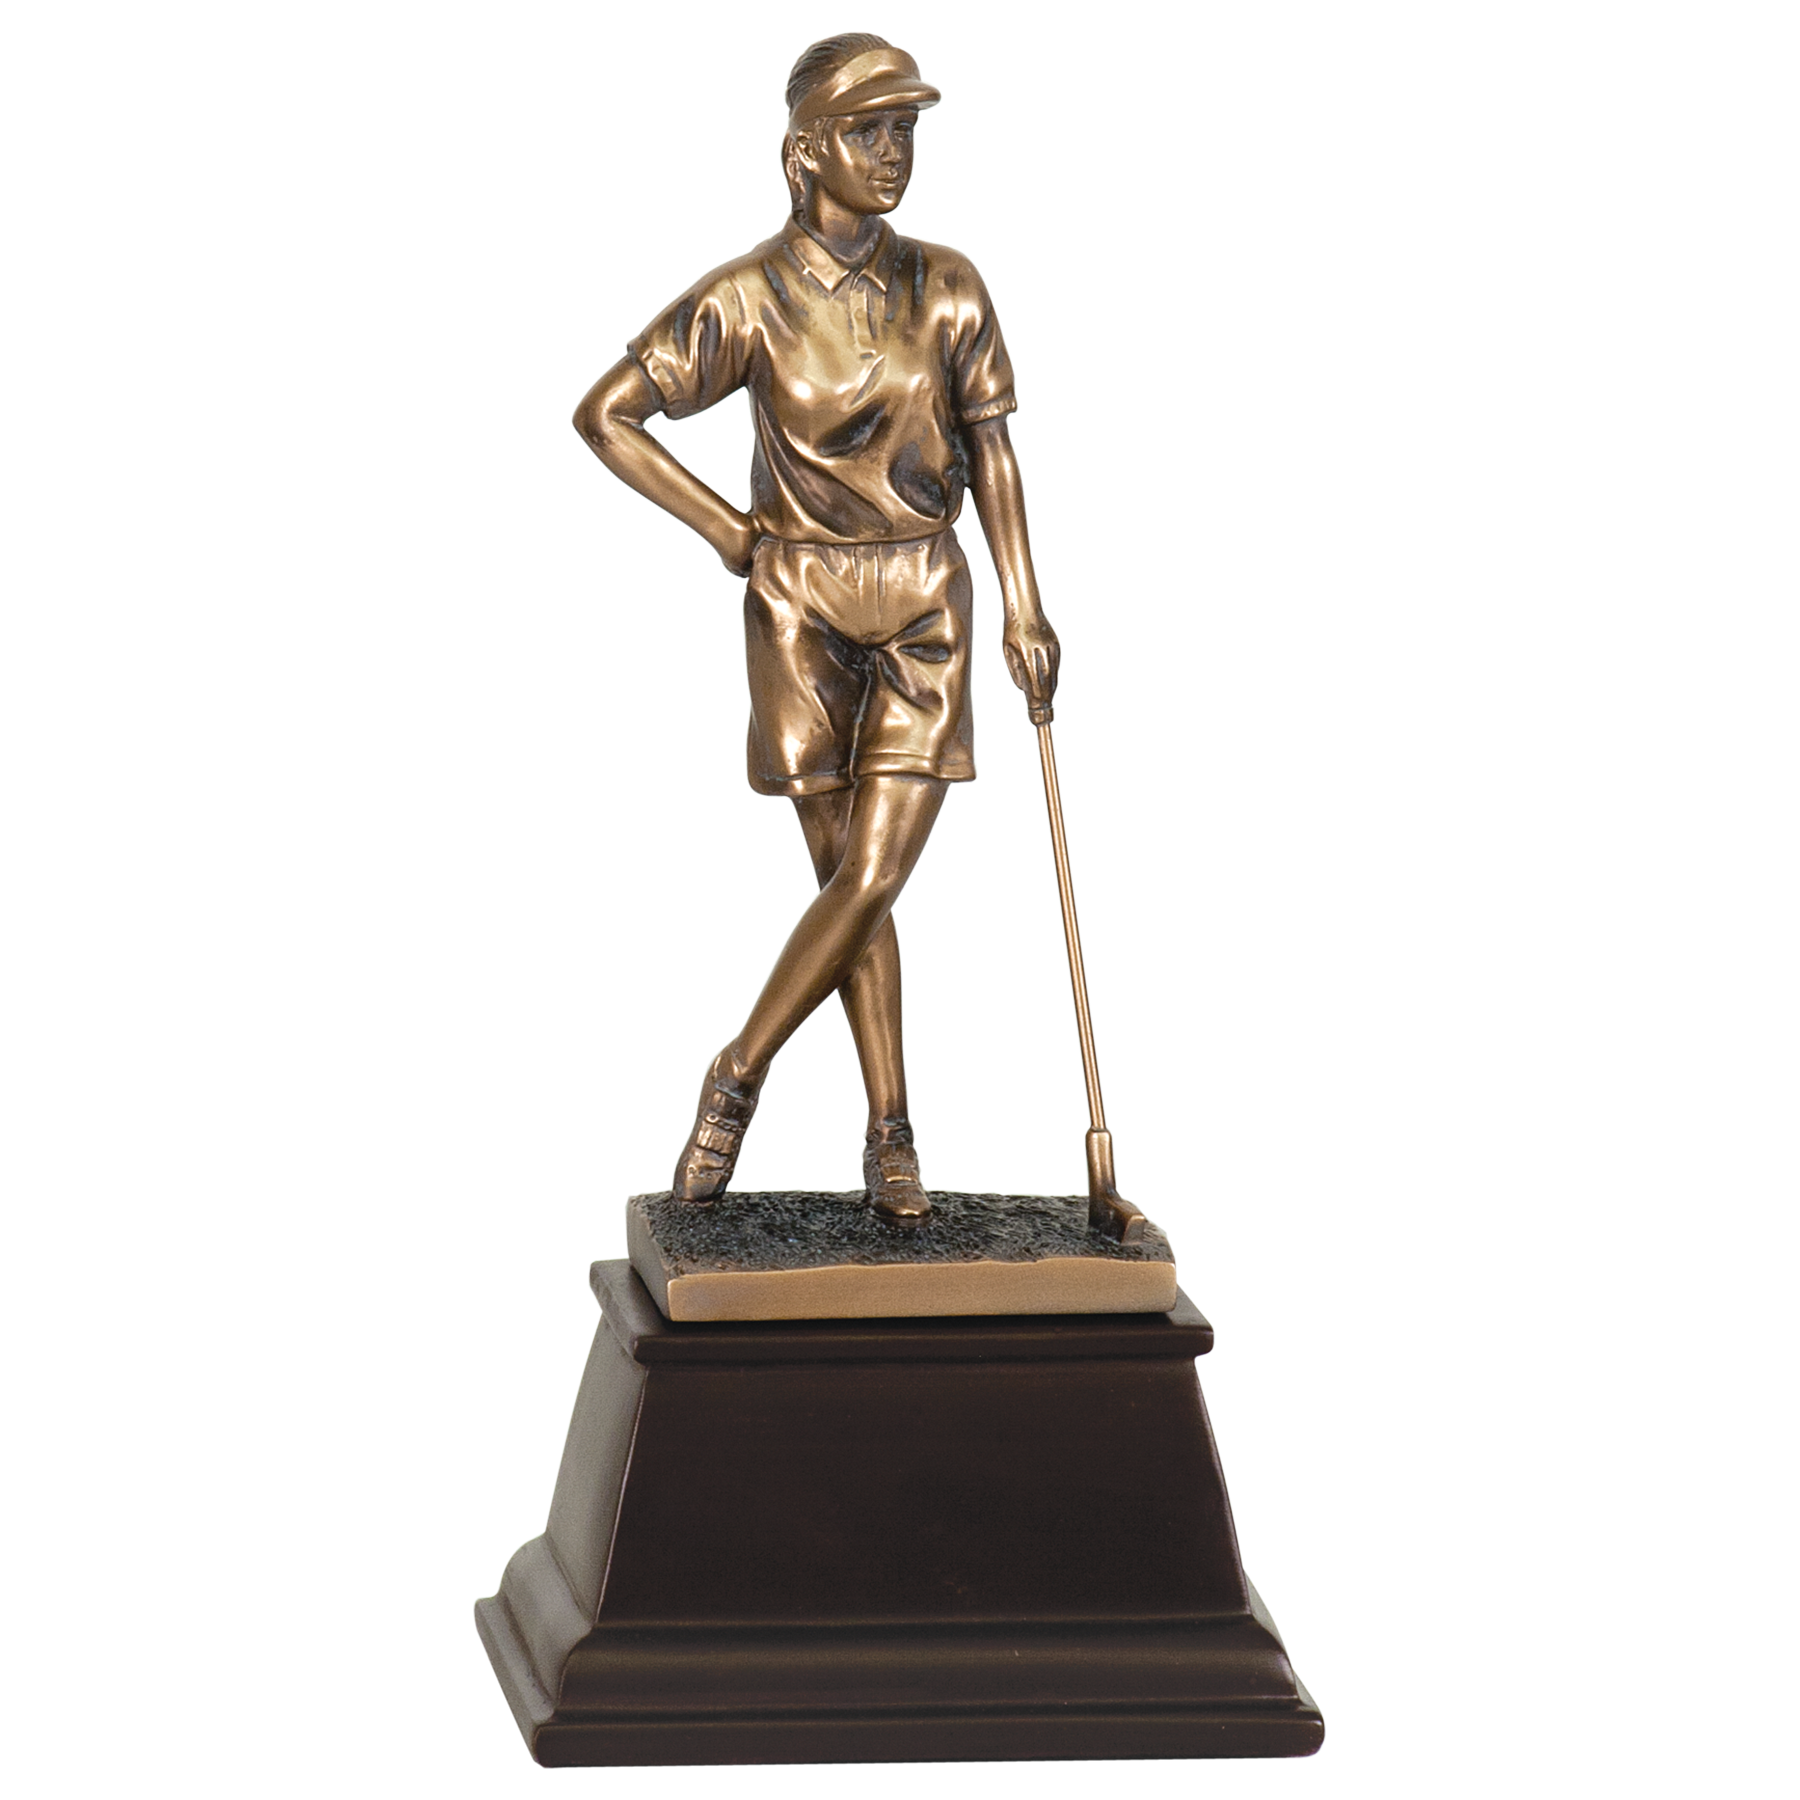 Medium sized bronze golf trophy on a tapered square dark wood base. The bronze female golfer is standing with her legs grossed and one hand on her hip and the other hand leaning on a golf club. She is staring off into the distance with a visor on.